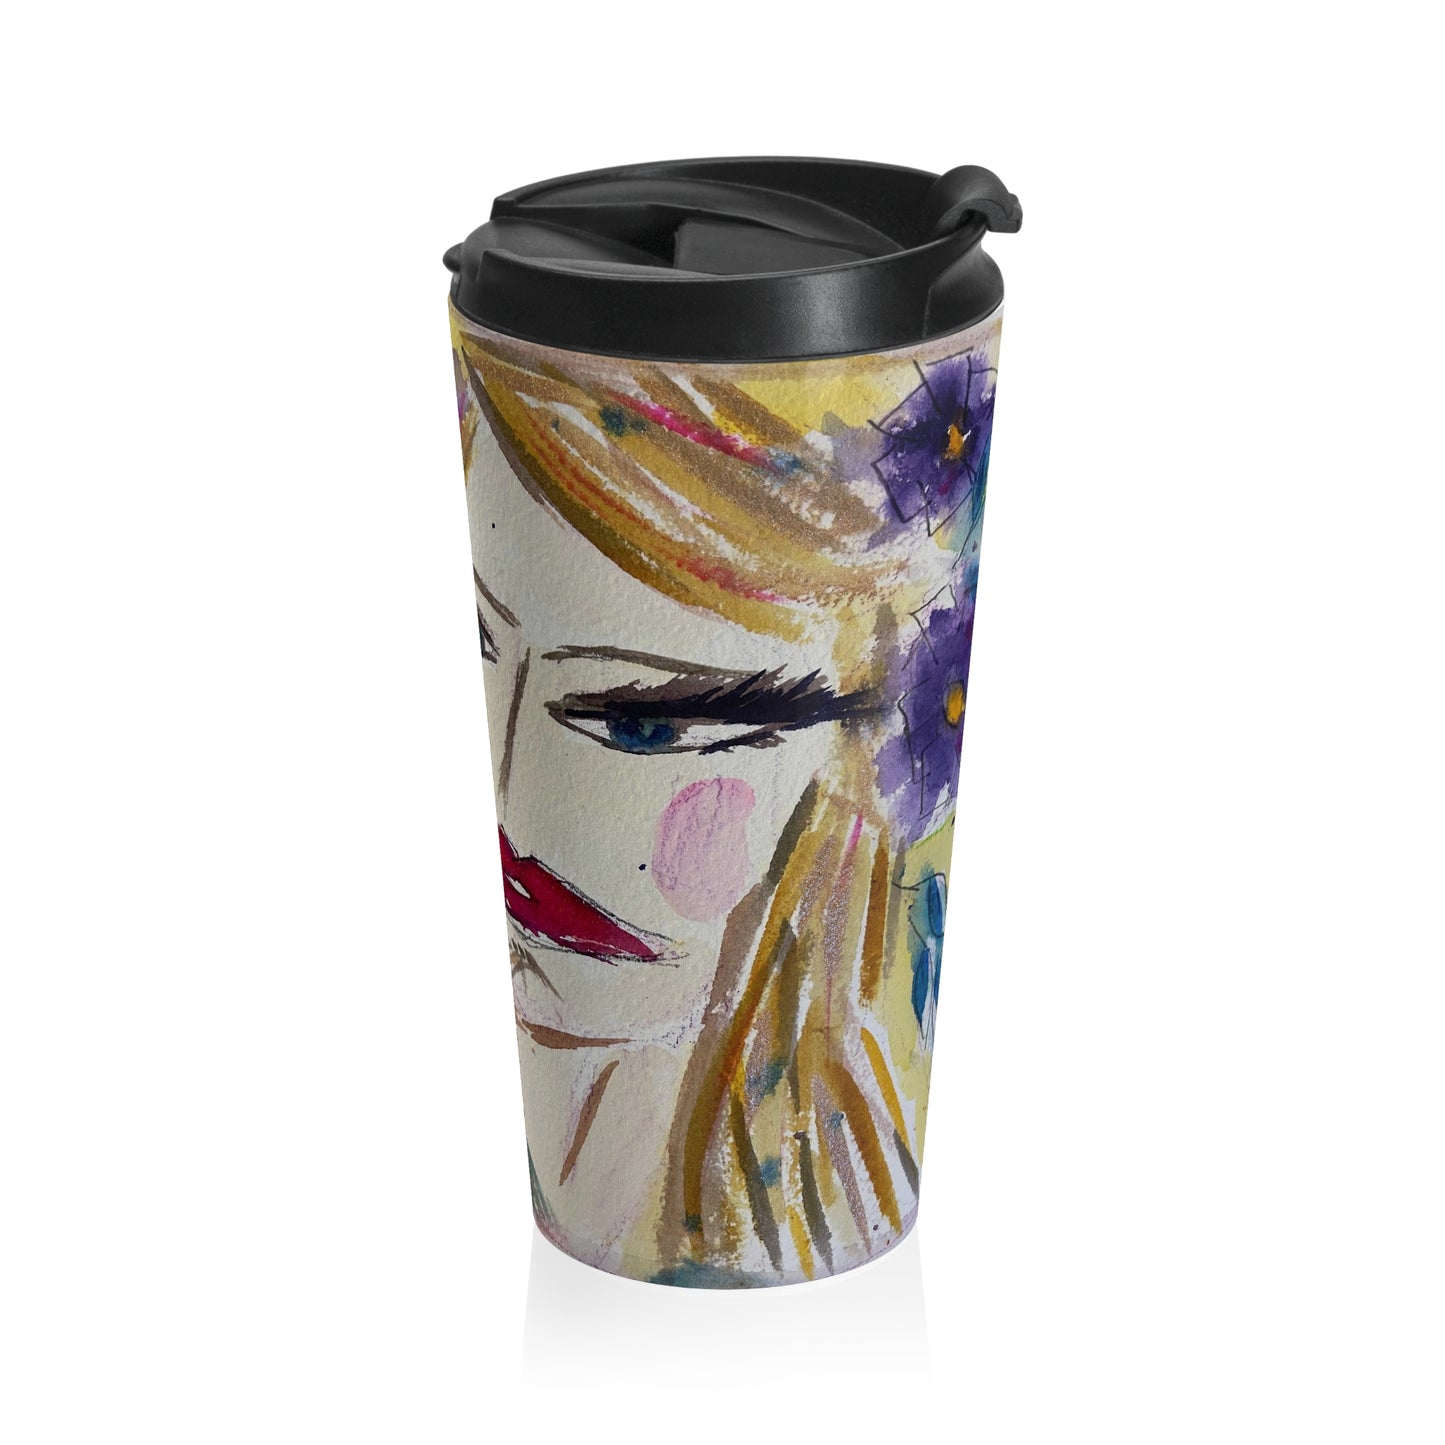 No Talkie before Coffee! Distorted Face Blonde Stainless Steel Travel Mug